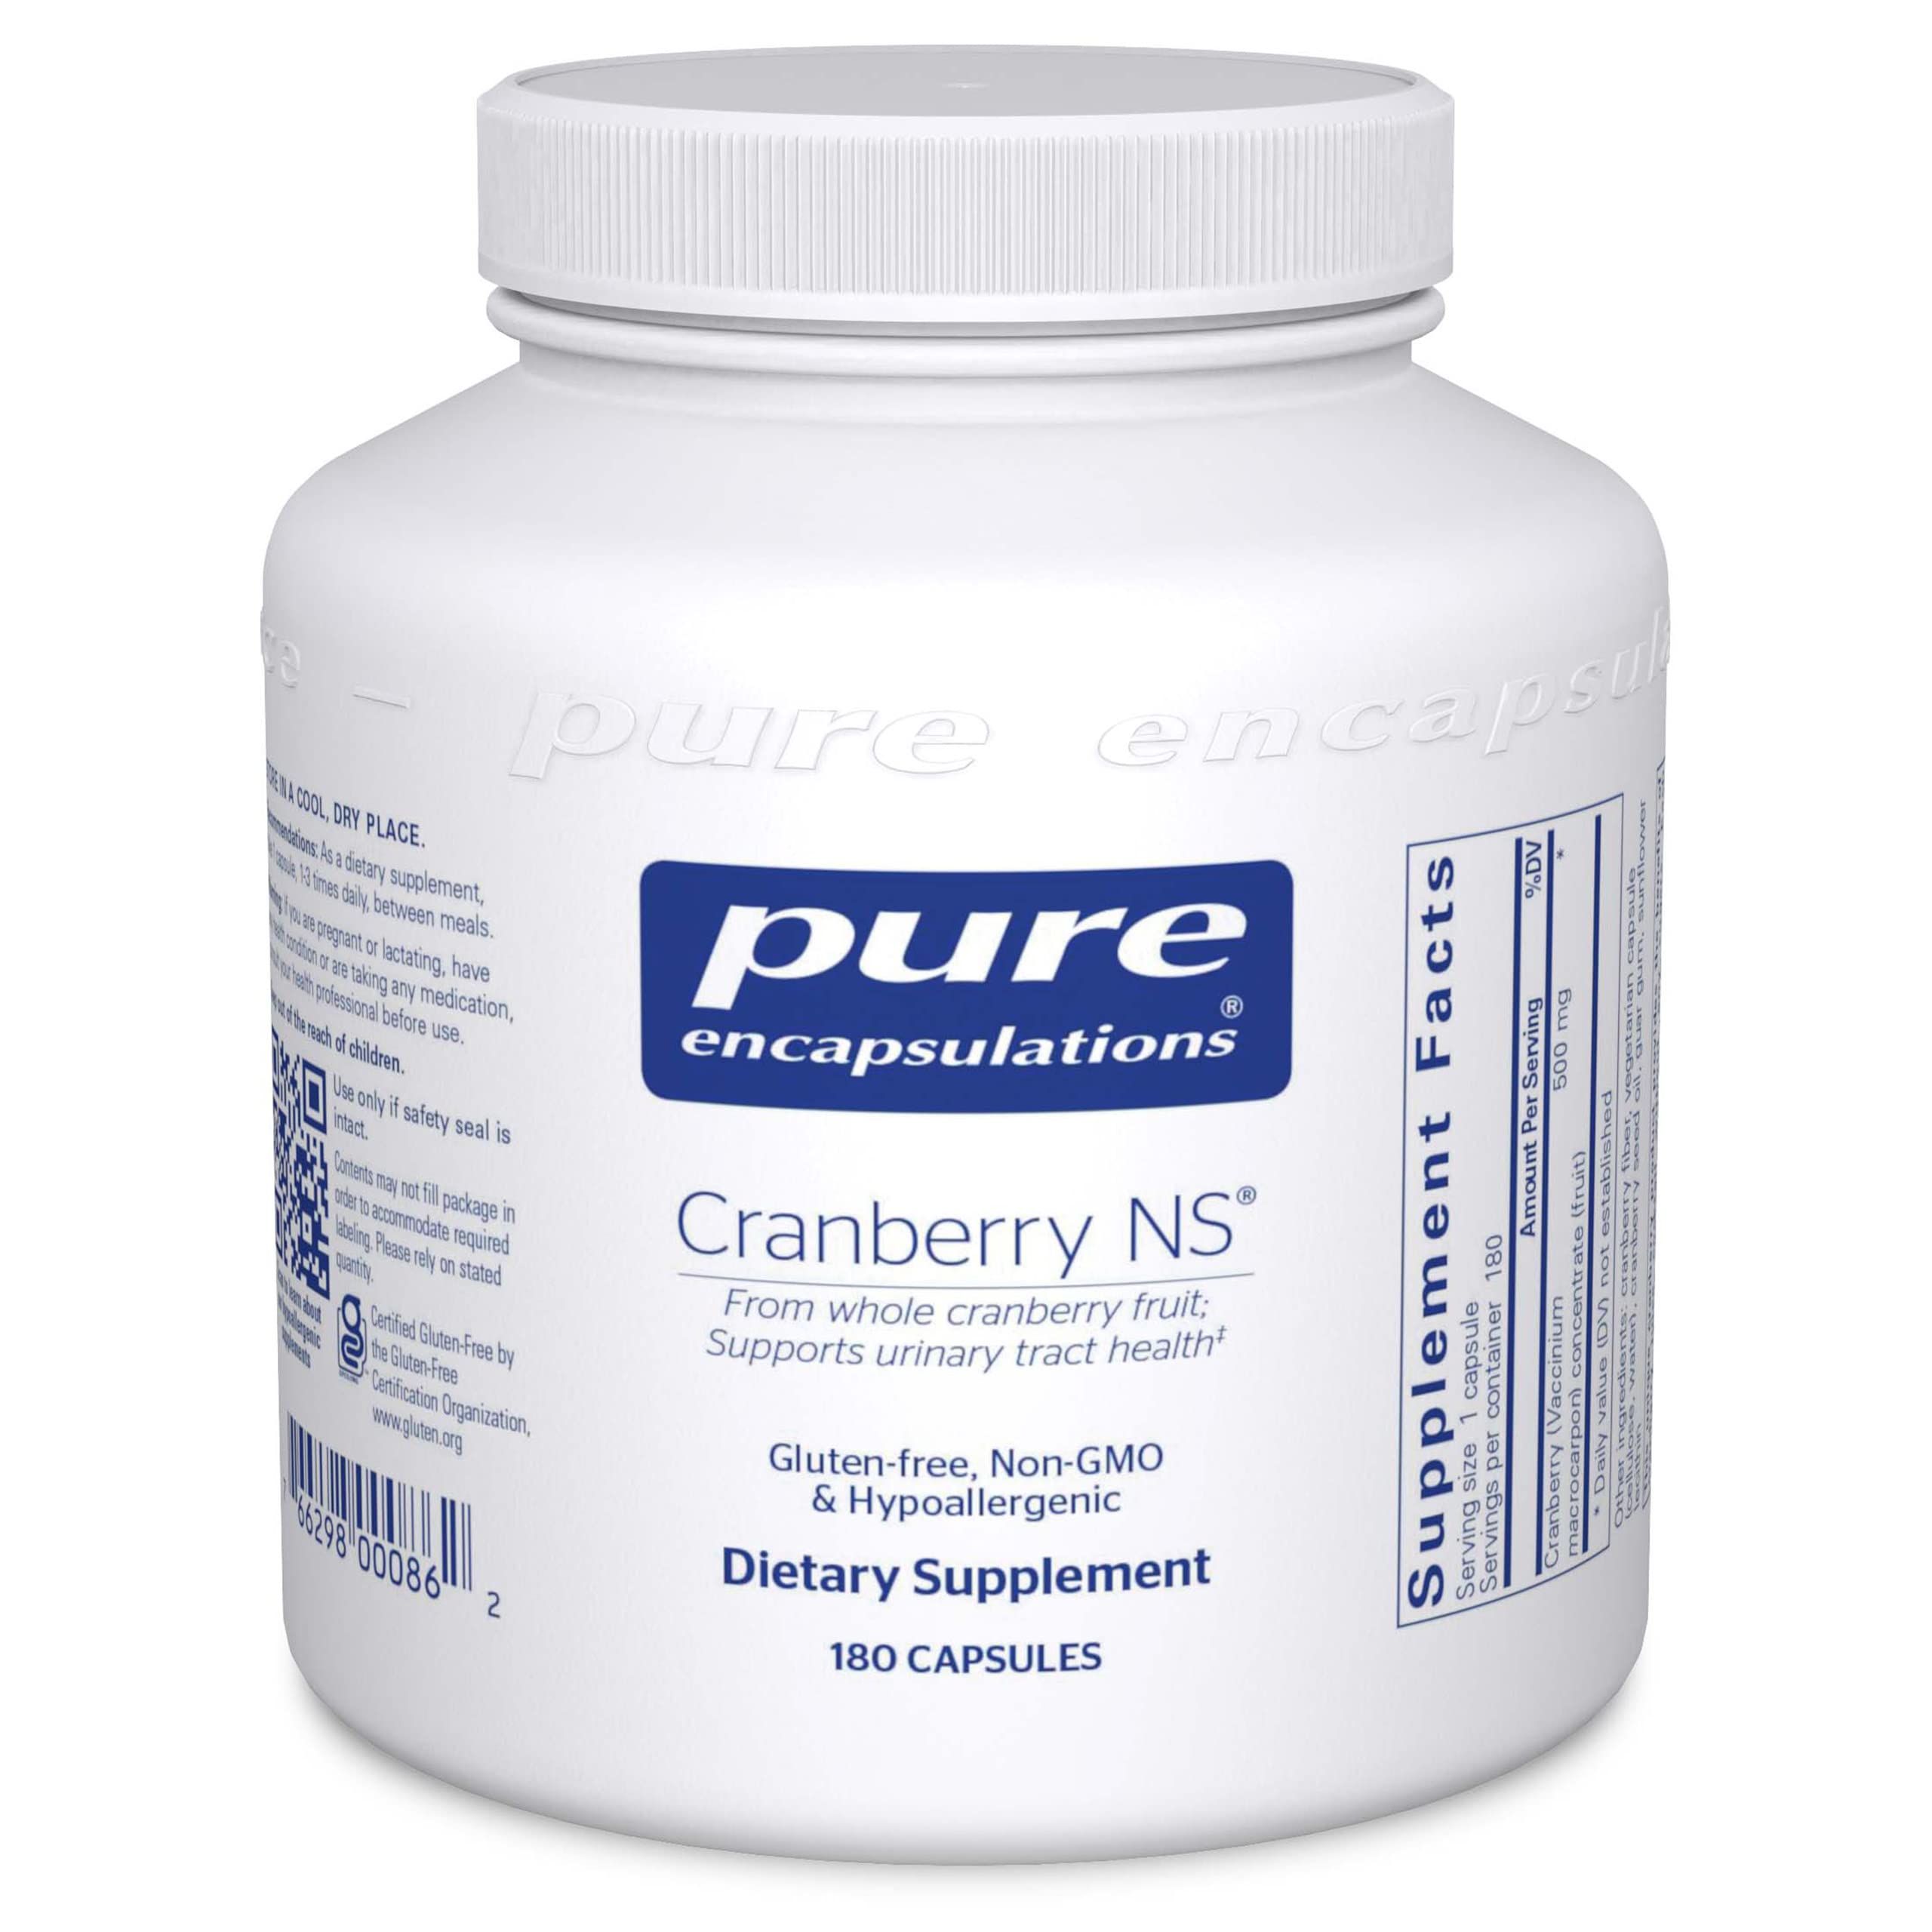 Pure Encapsulations - Cranberry NS - Hypoallergenic Supplement to Support Urinary Tract Health - 180 Capsules